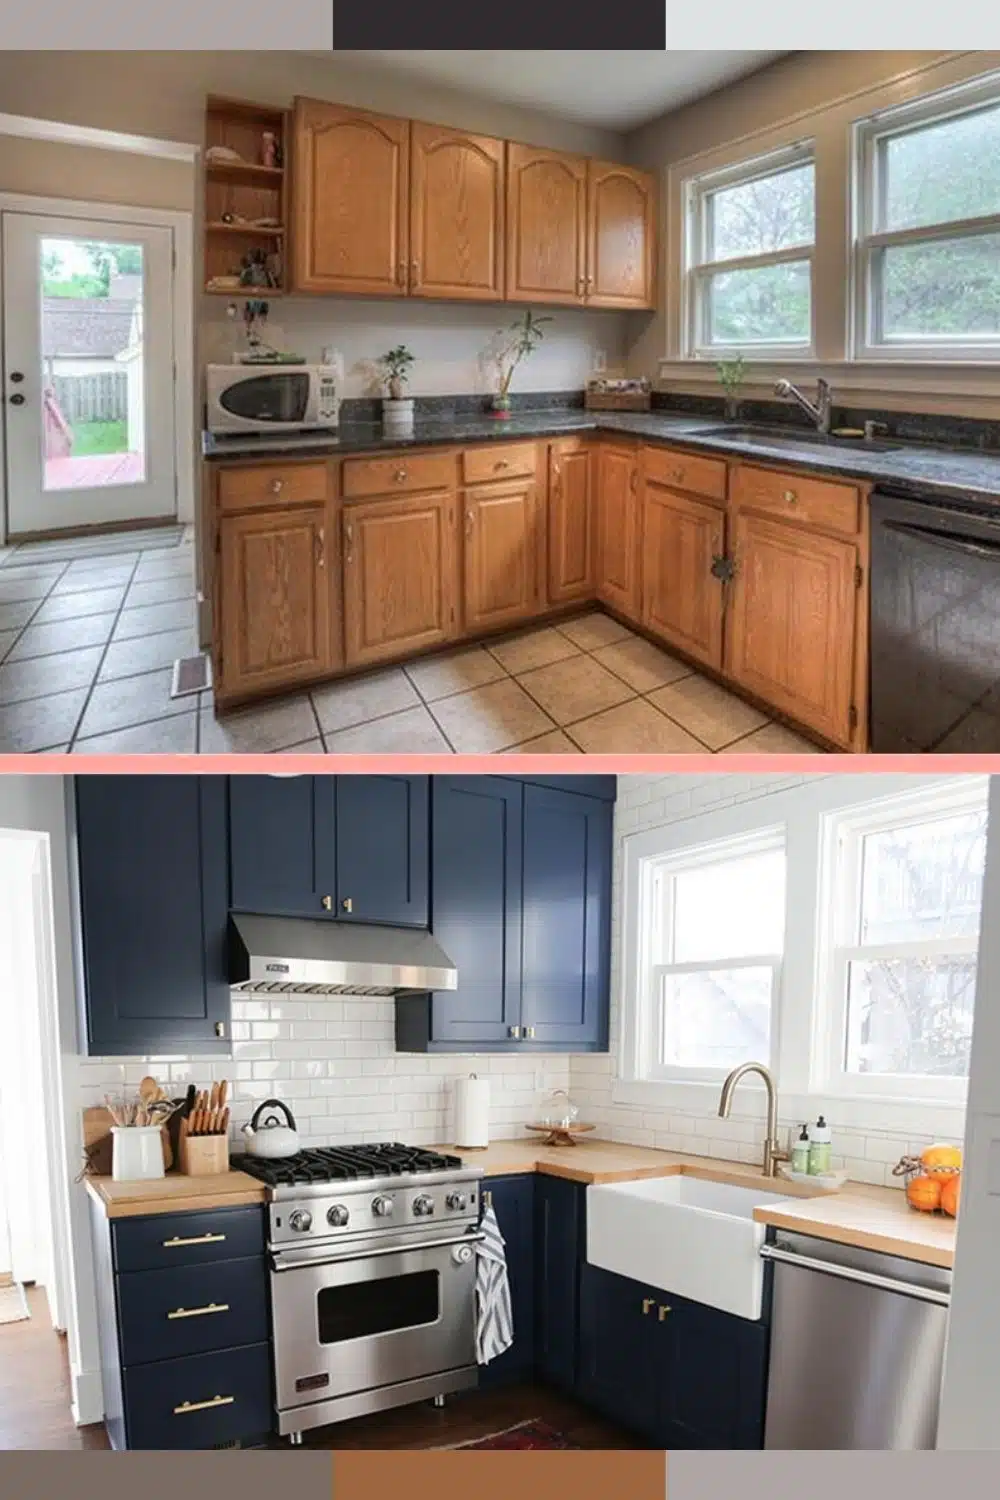 how much does it cost to remodel a kitchen in a condo